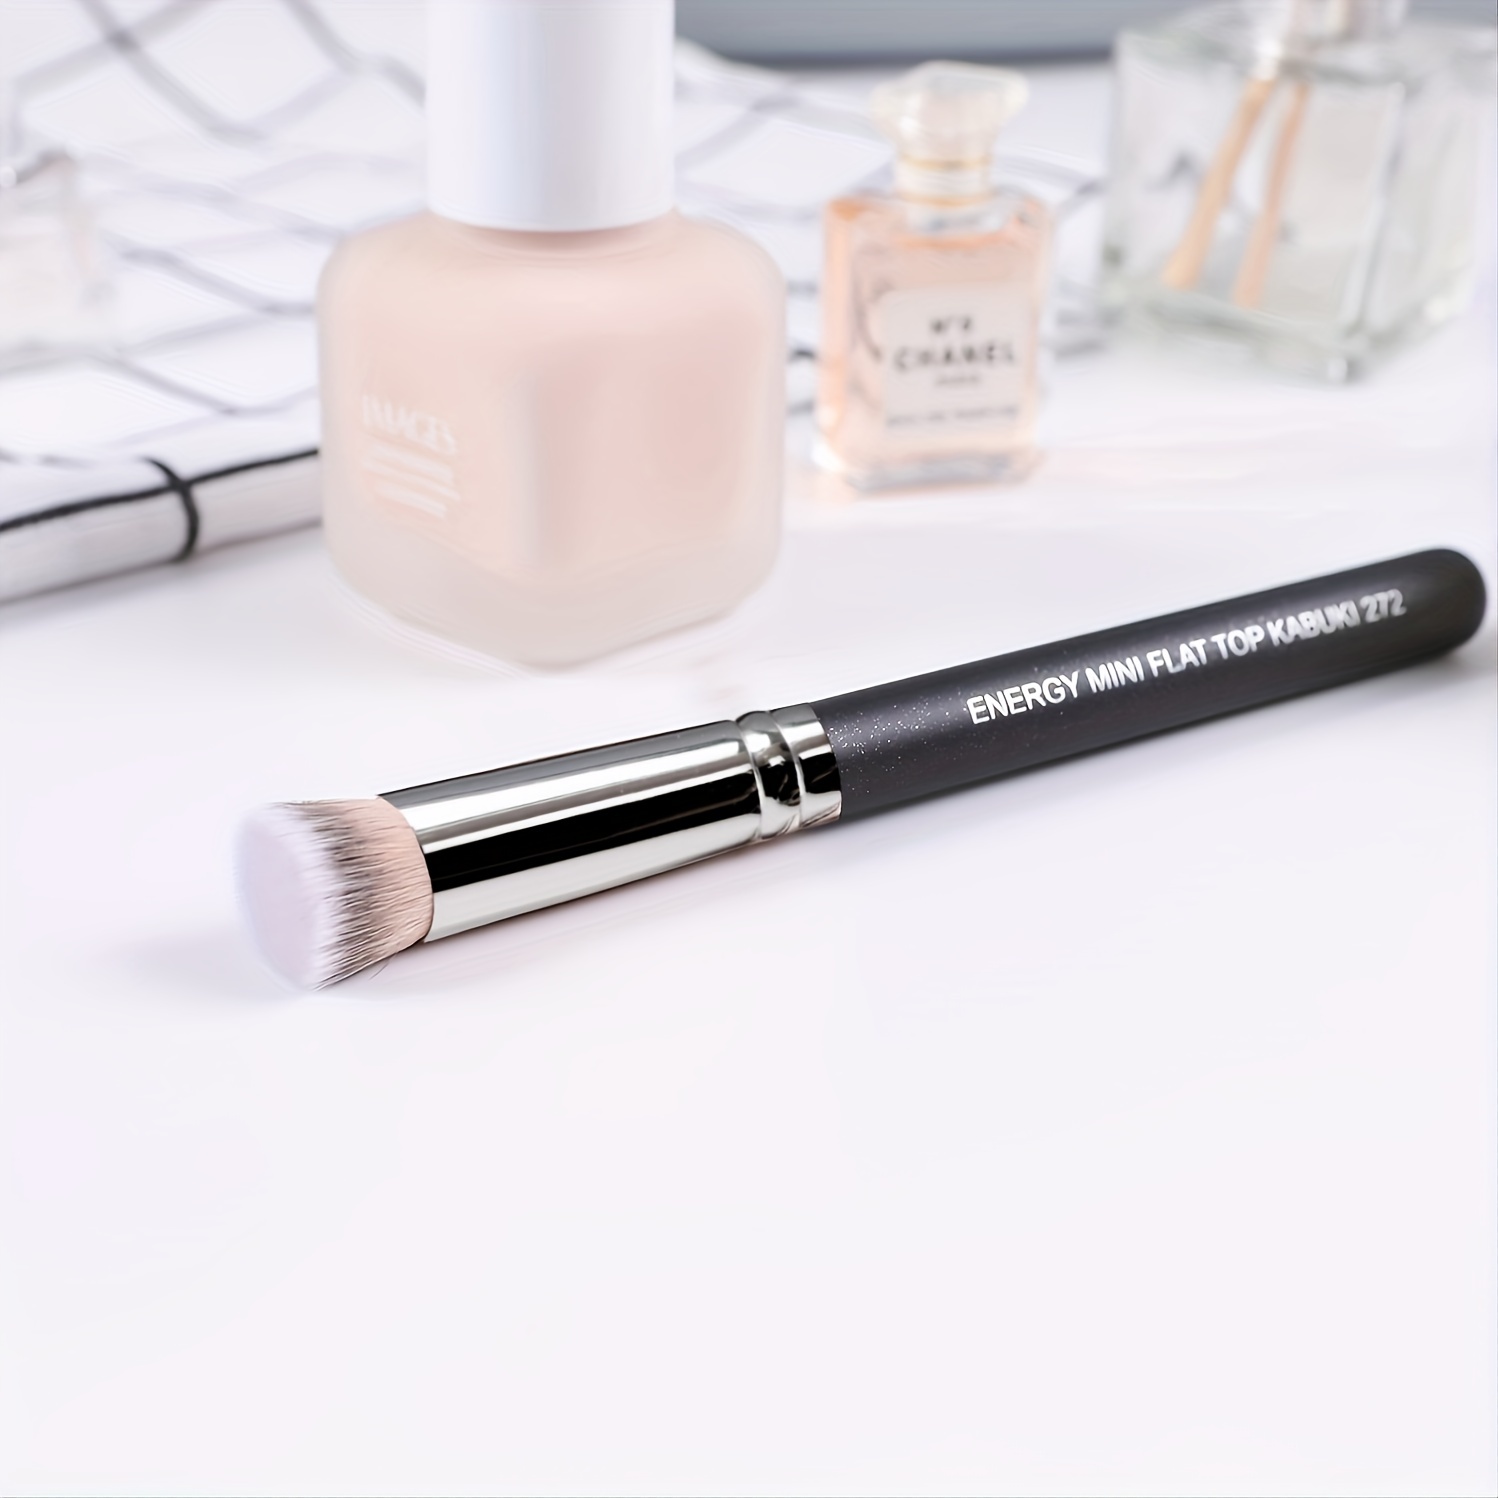 Energy Concealer Brush - Mini Flat Top Kabuki Brush For Smooth And Even  Application Of Concealer, Foundation